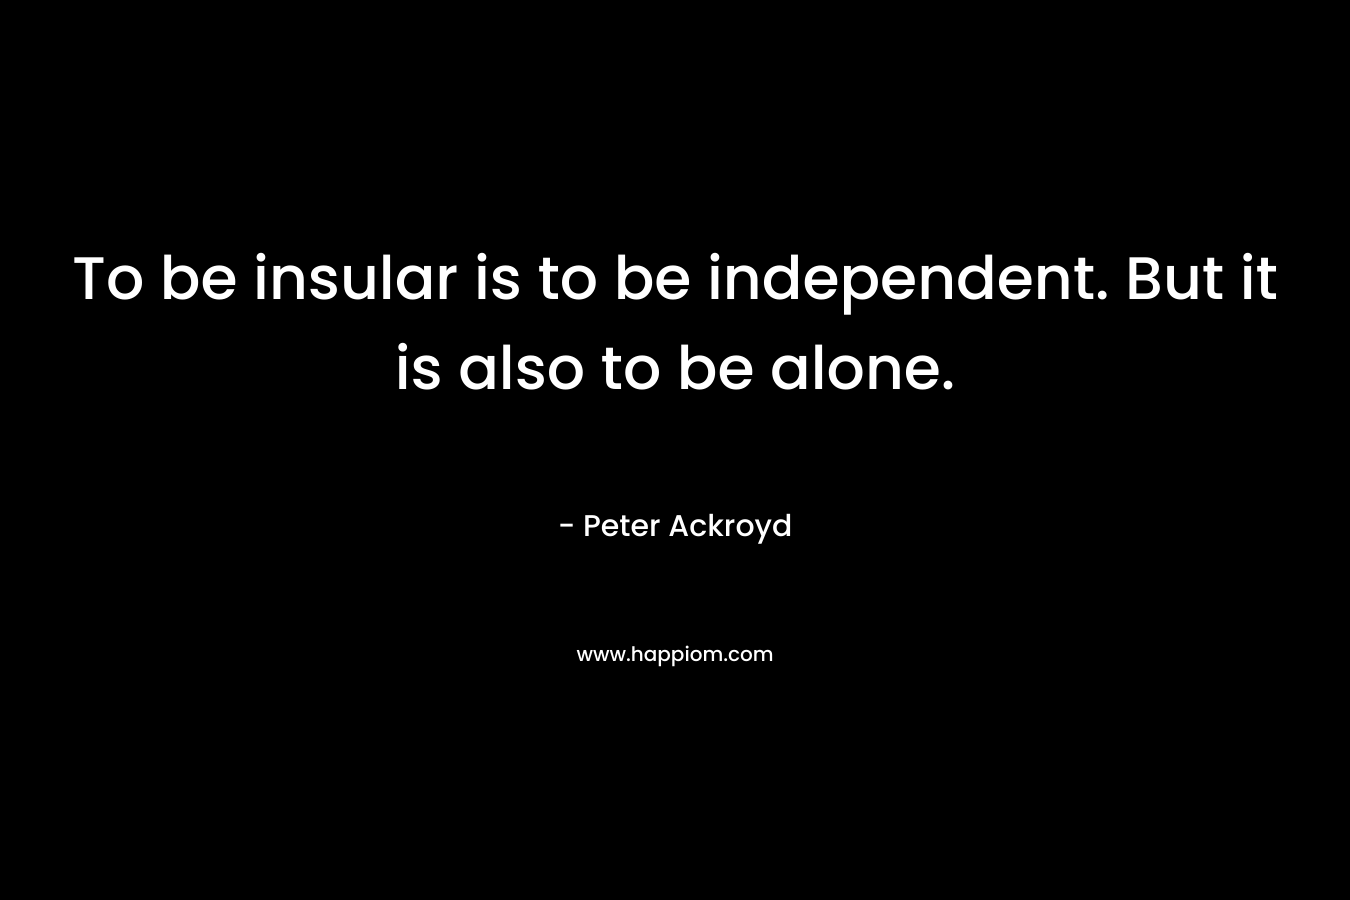 To be insular is to be independent. But it is also to be alone. – Peter Ackroyd